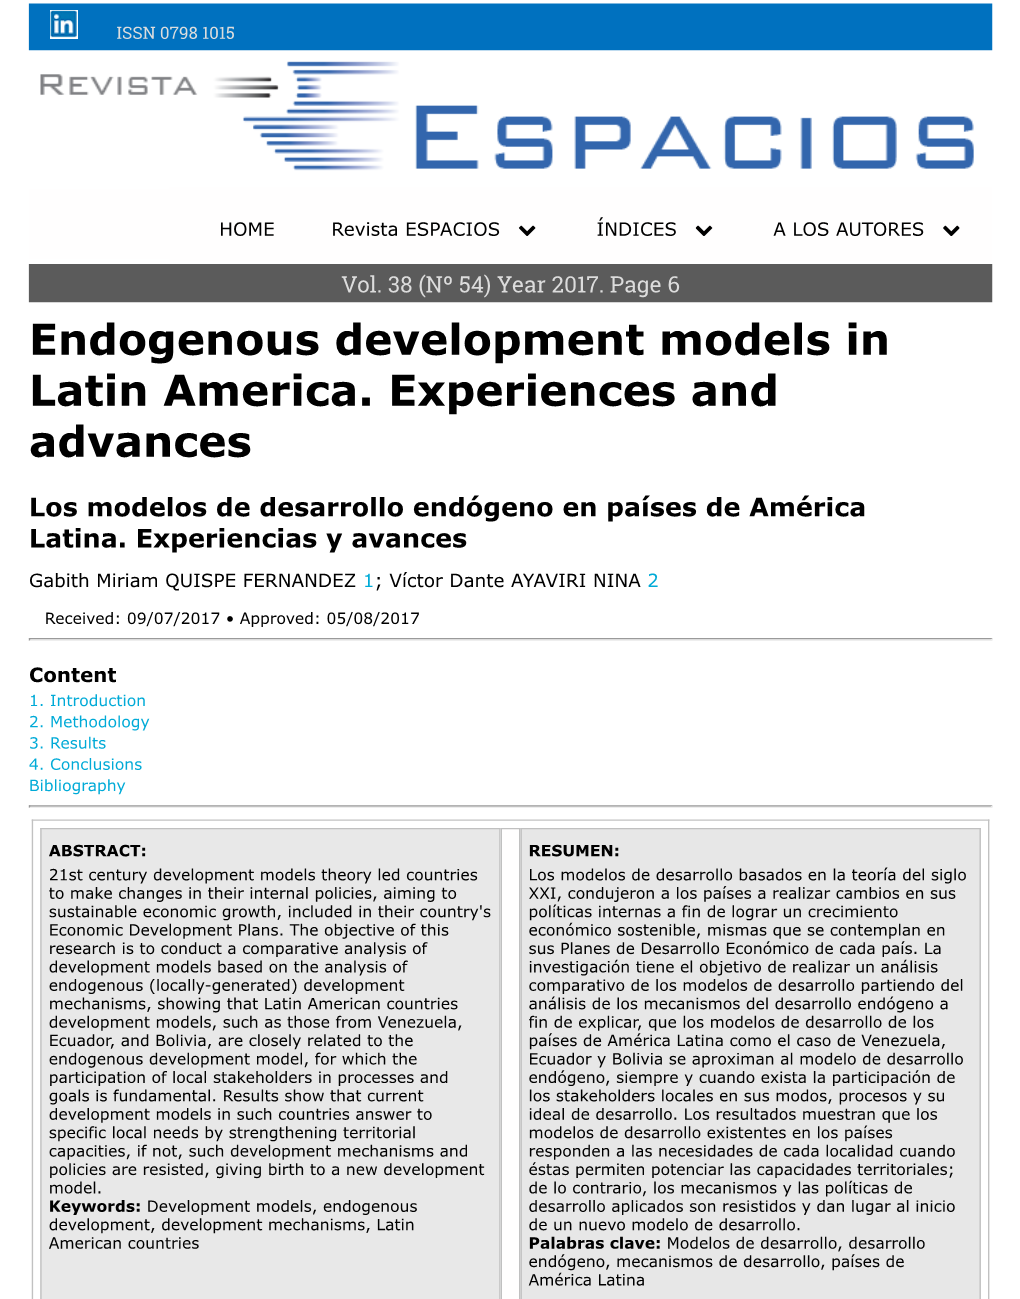 Endogenous Development Models in Latin America. Experiences and Advances